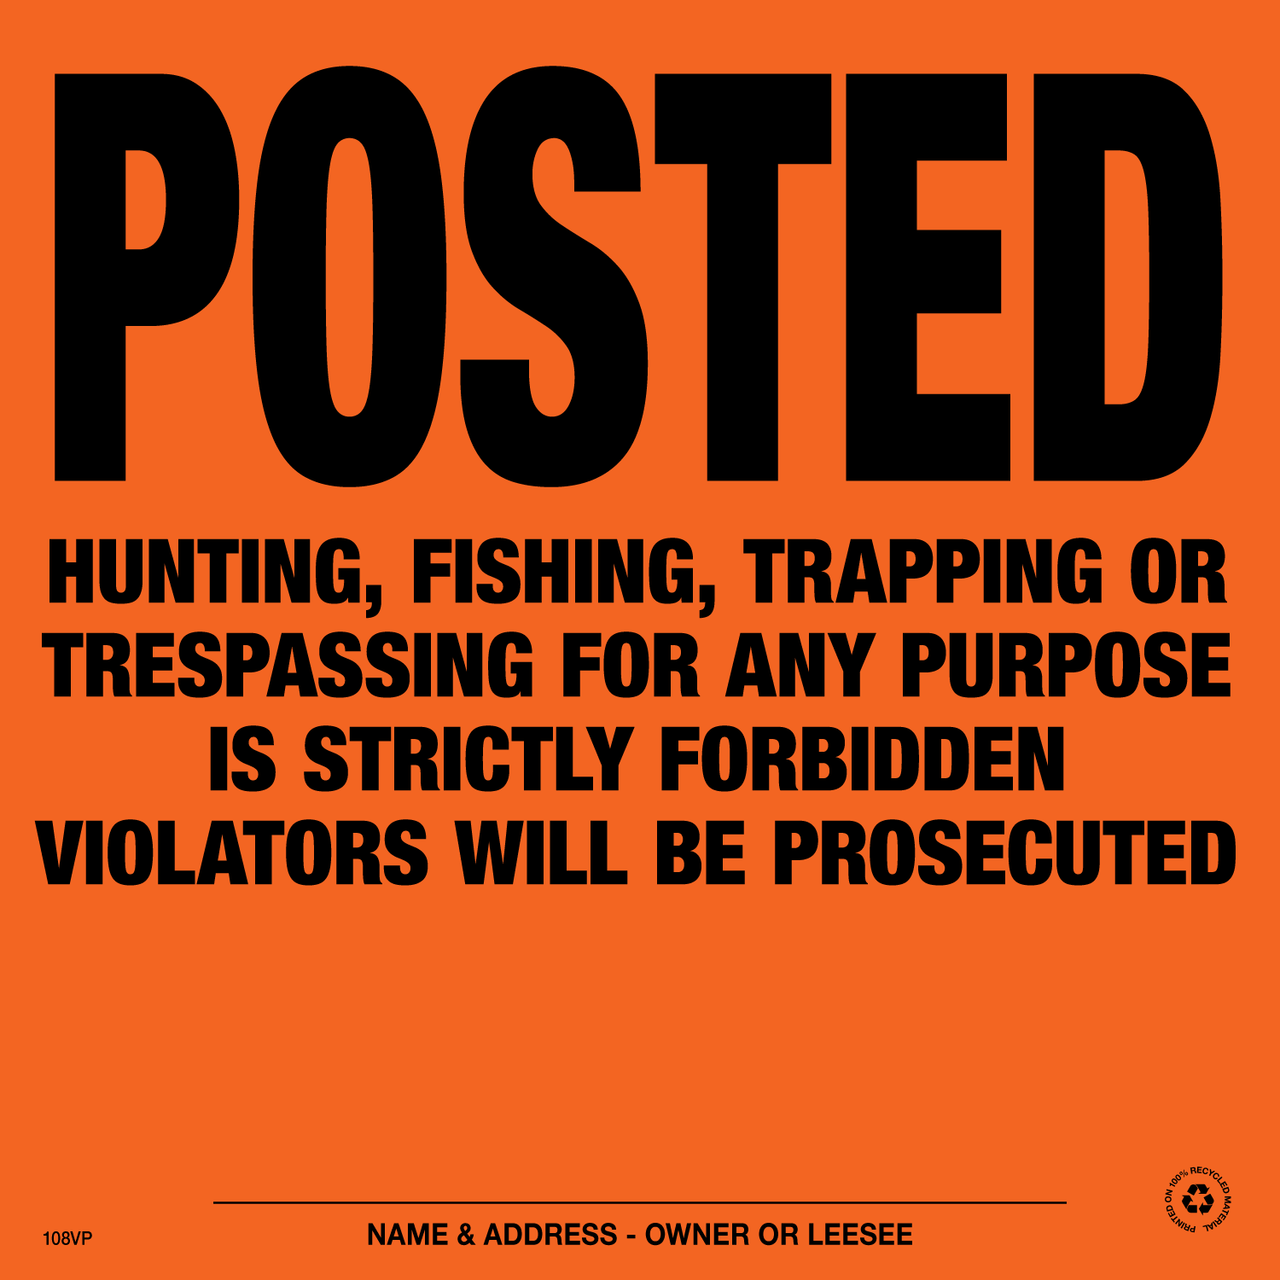 Posted Violators Will Be Prosecuted Posted Signs - Orange Aluminum - Pack of 25